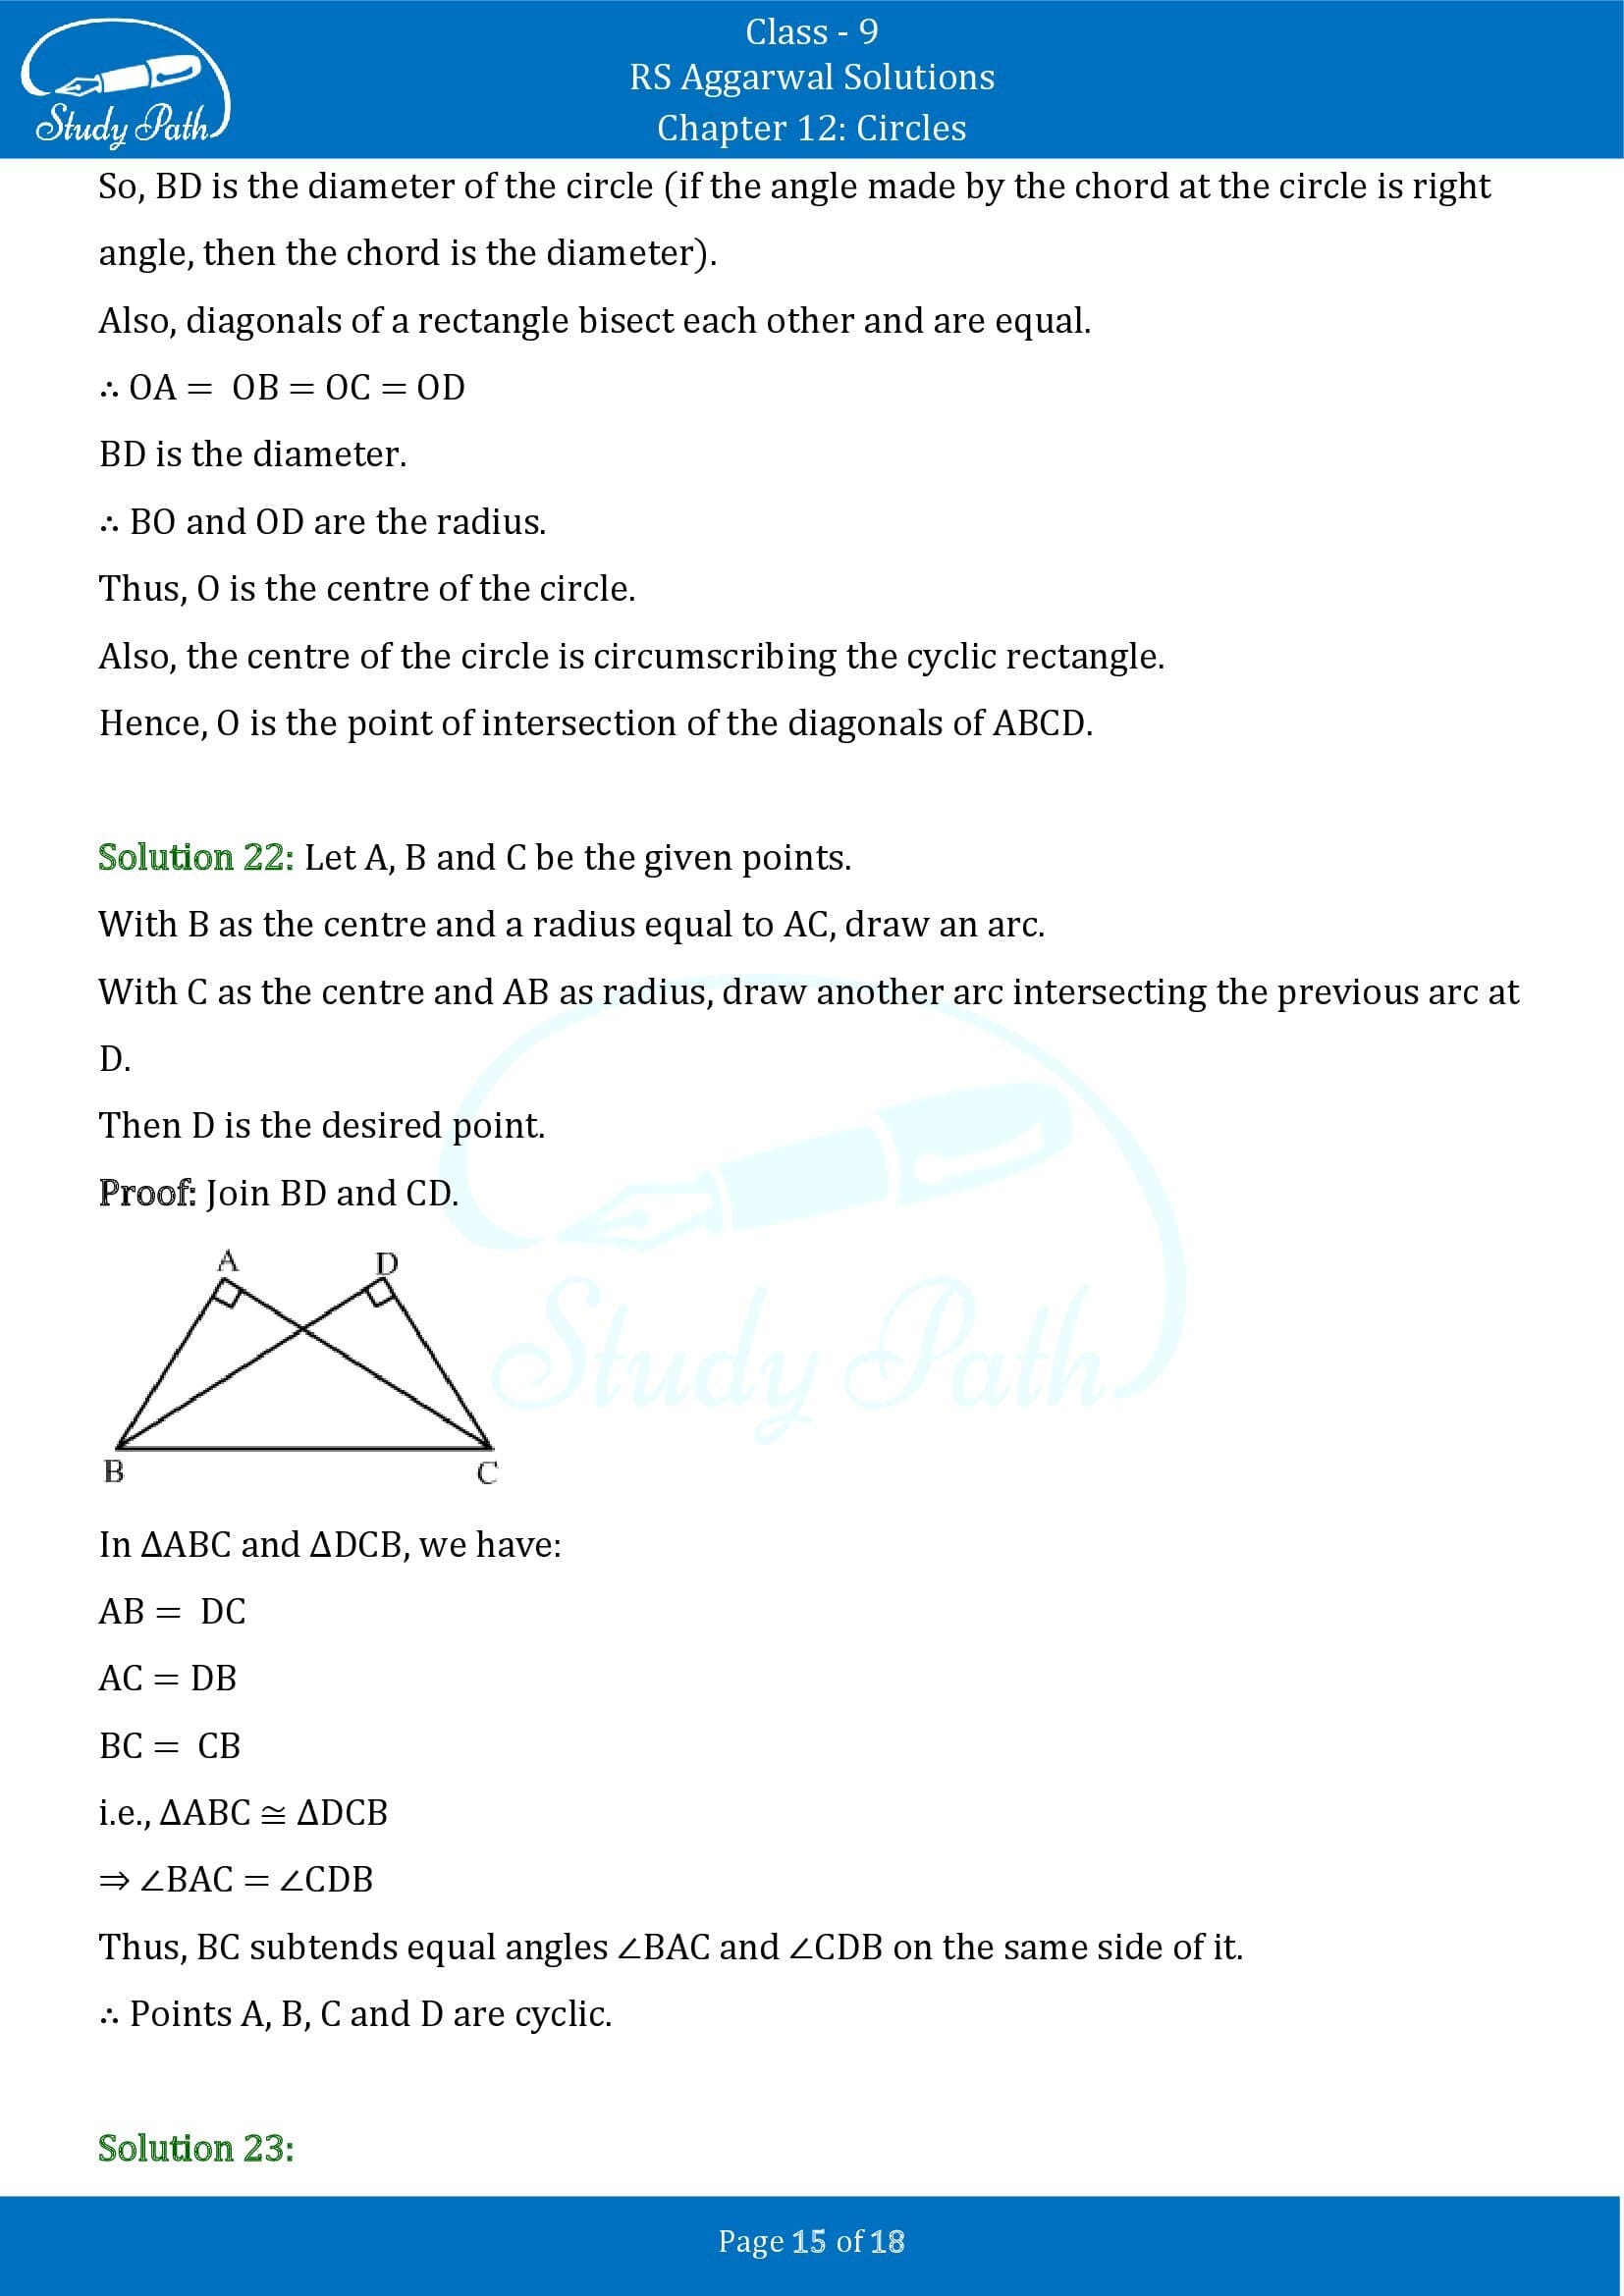 RS Aggarwal Solutions Class 9 Chapter 12 Circles Exercise 12C 00015